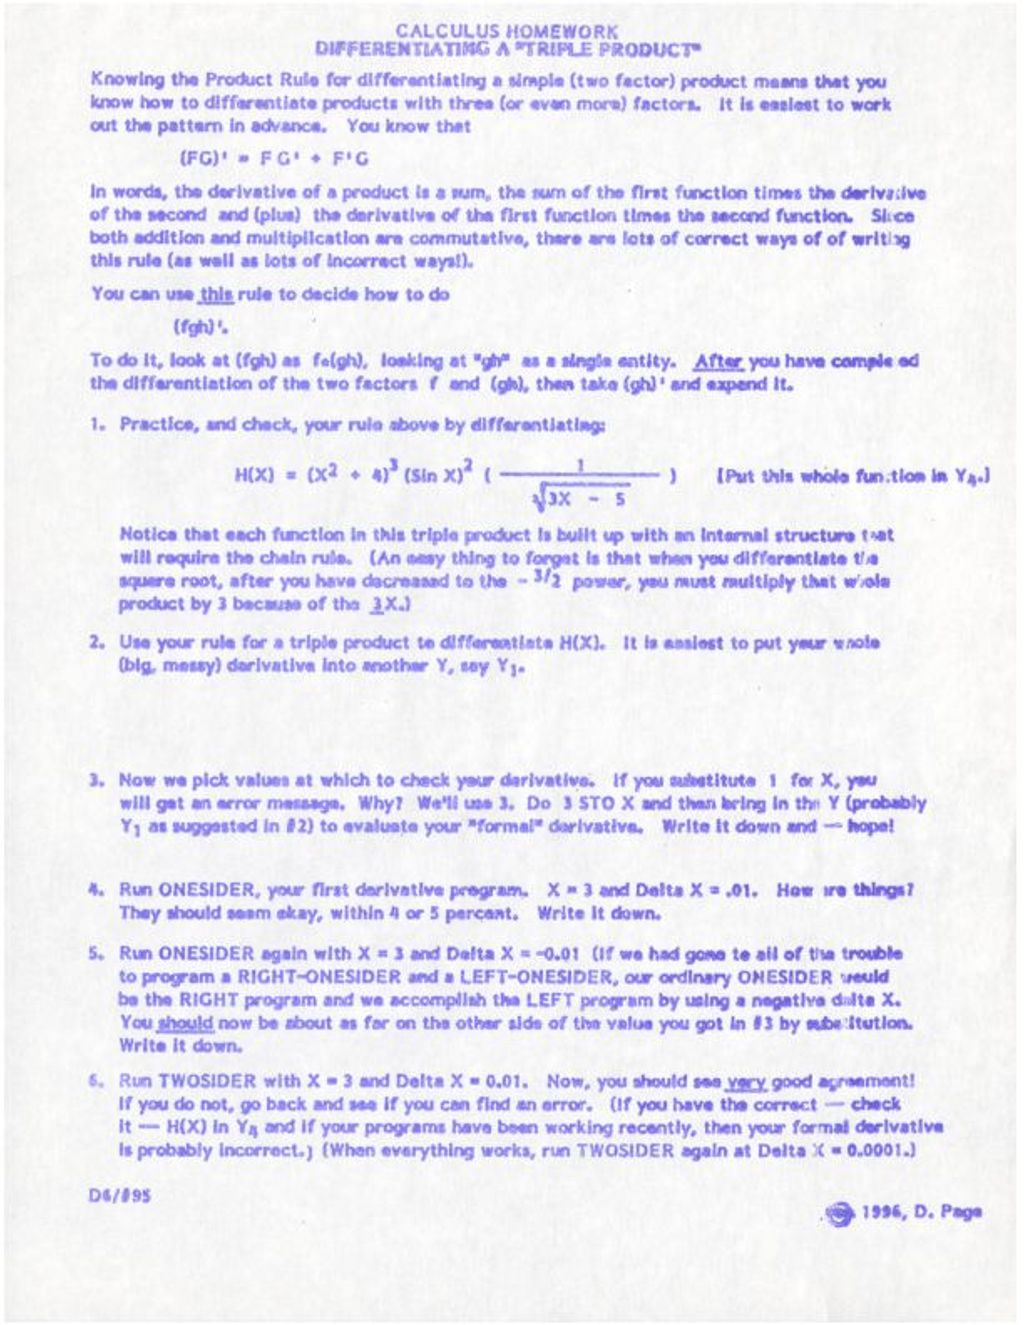 Calculus Homework Differentiating a “Triple Product” (1996)